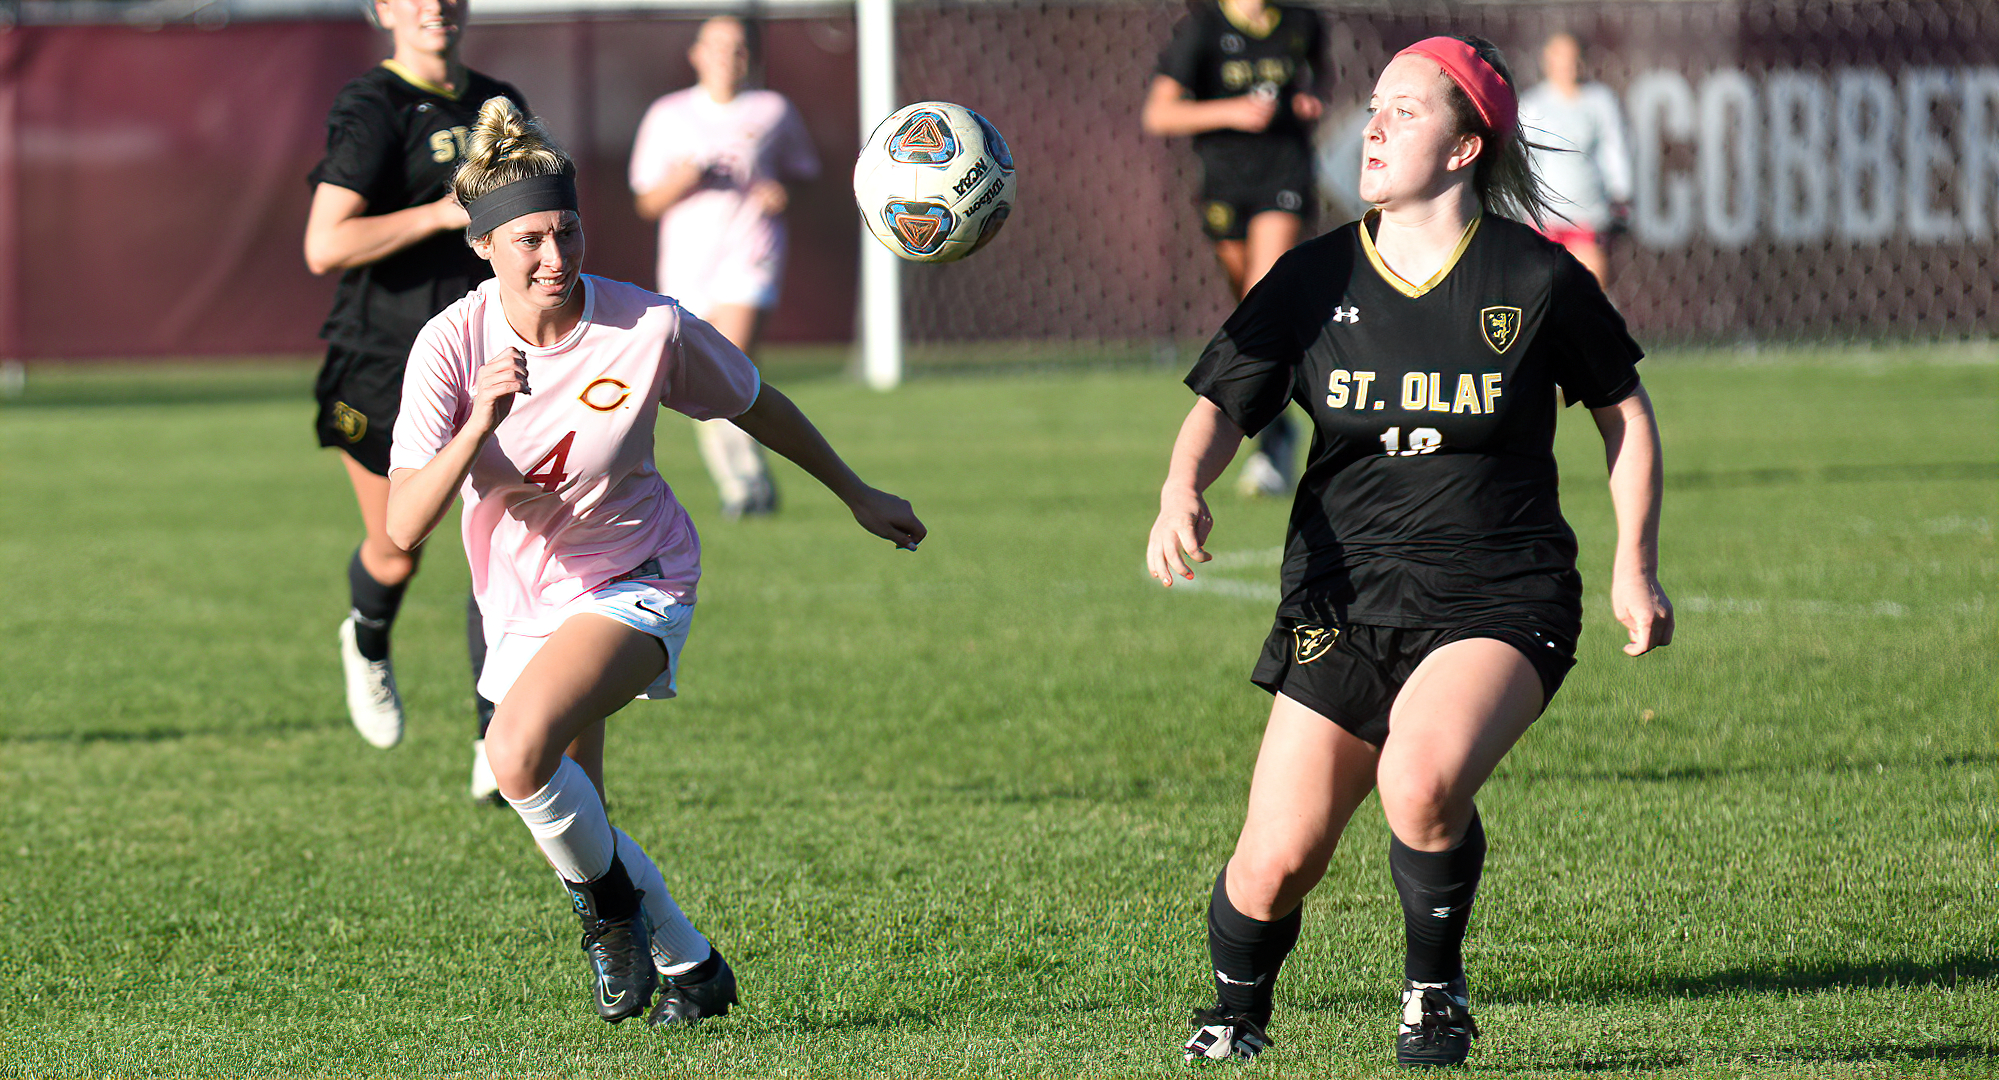 Freshman Kylie Osborn goes after the ball during the second half of the Cobbers' game with St. Olaf. She scored her first collegiate goal in the game.